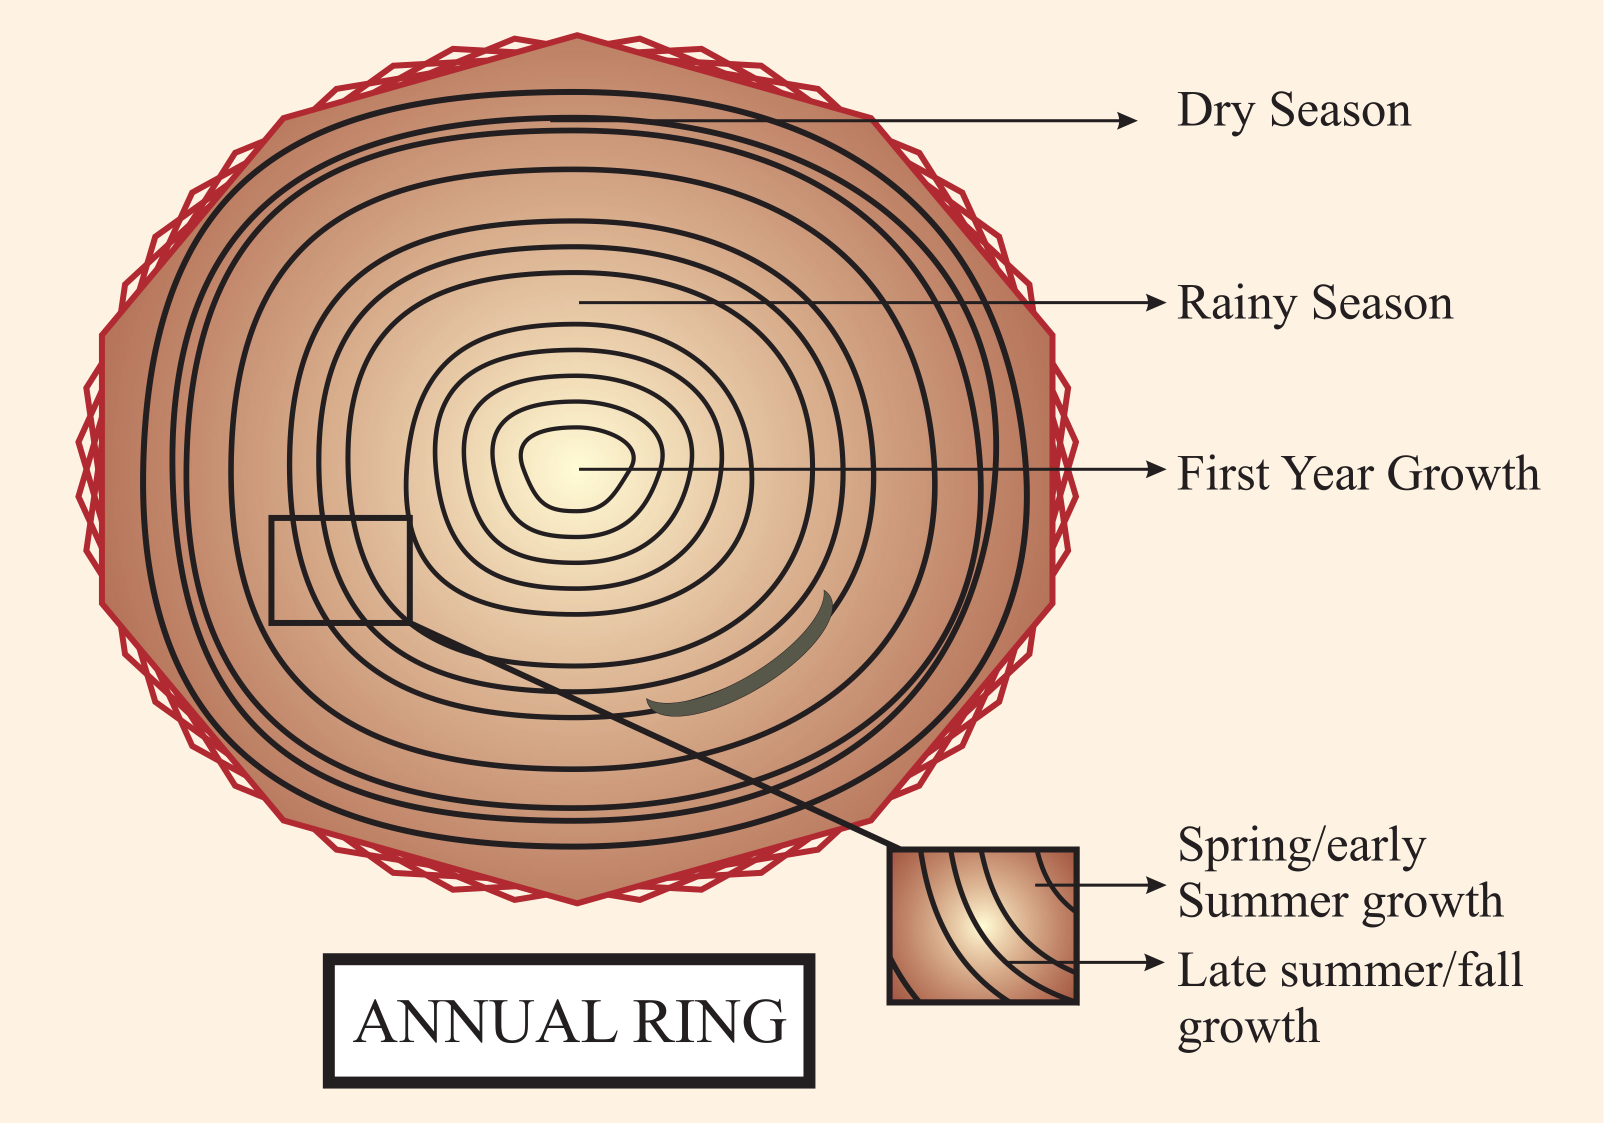 Annual Growth Rings On A Tree Trunkvector Illustration On A White  Background Vector, Icon, Line, Plant PNG and Vector with Transparent  Background for Free Download